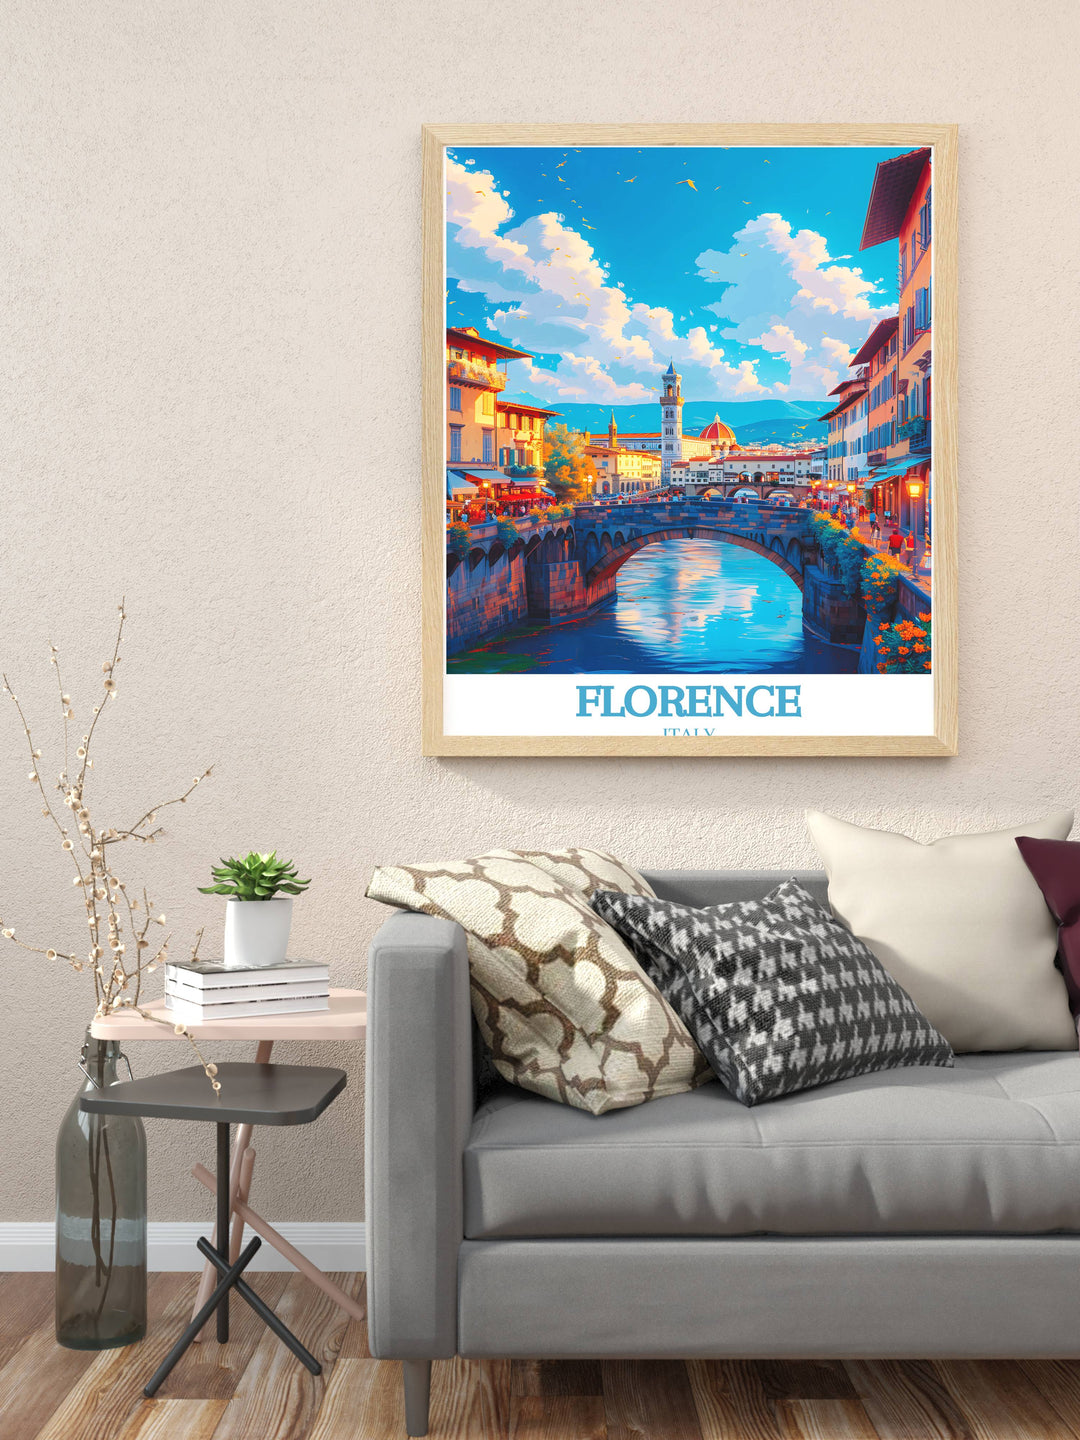 Ponte Vecchio at night, illuminated and reflected in the water, becomes a captivating decor print, perfect for those who love travel and art inspired by Florences romance